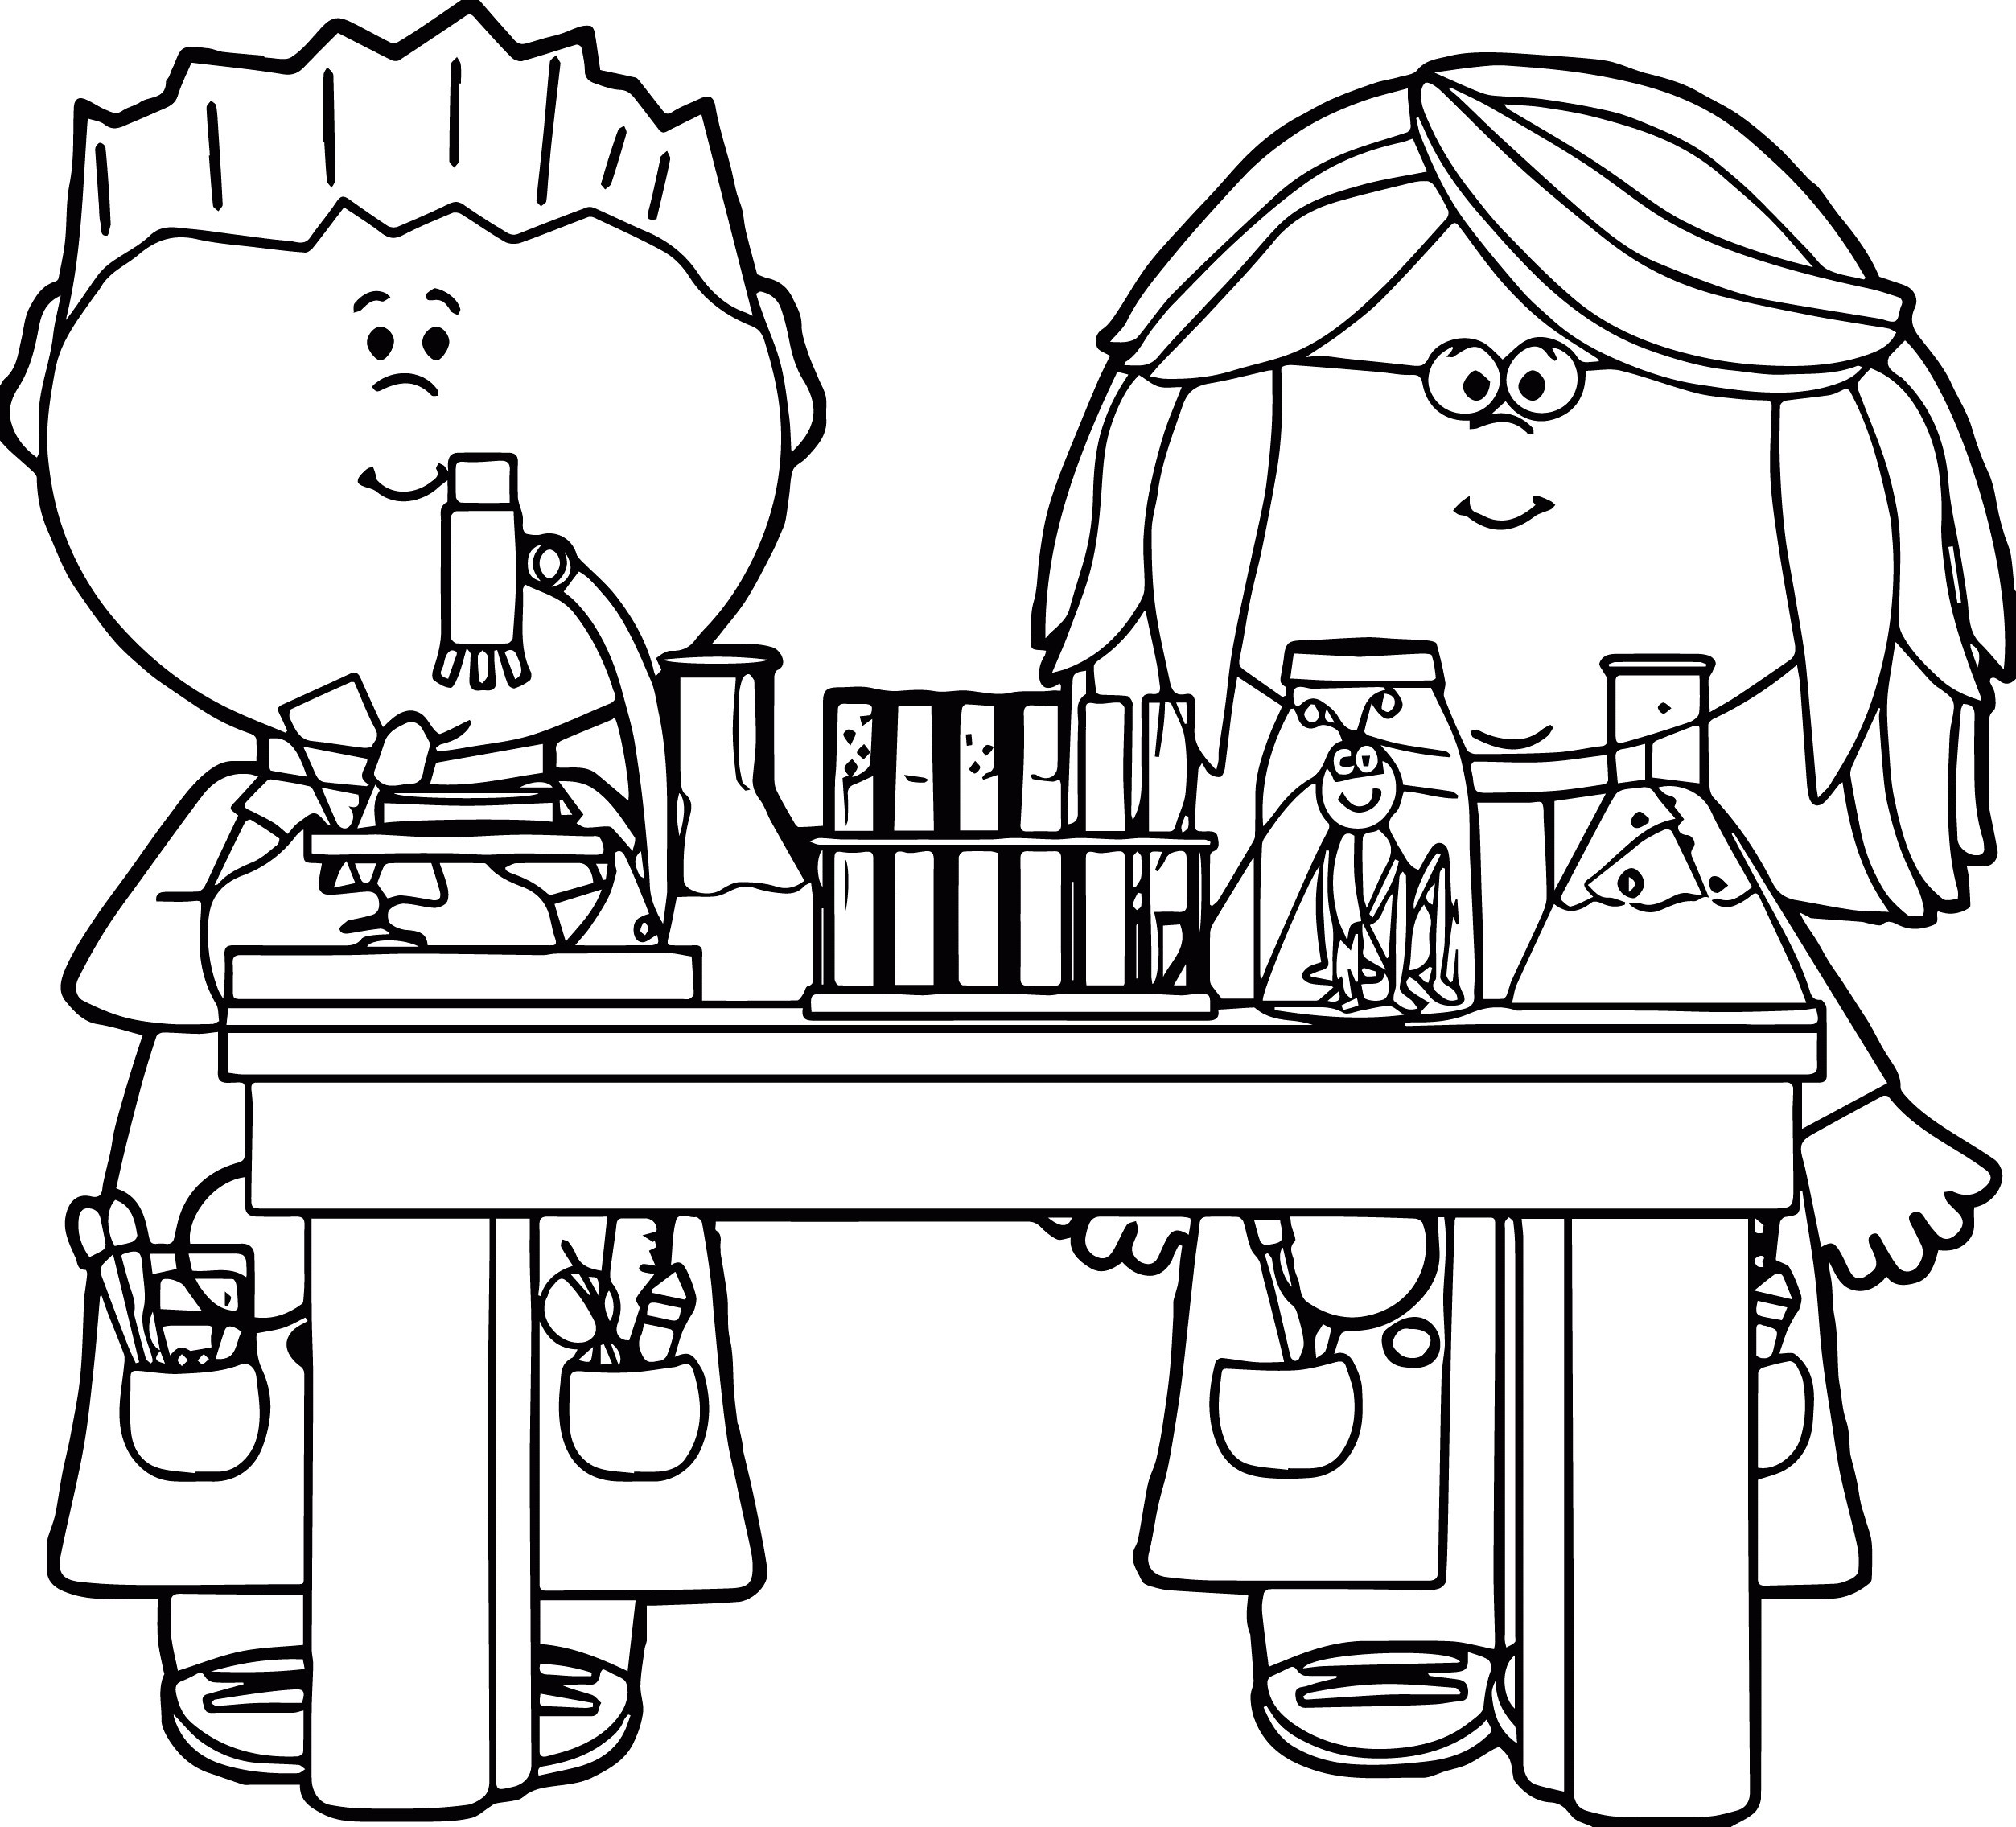 science-coloring-pages-best-coloring-pages-for-kids